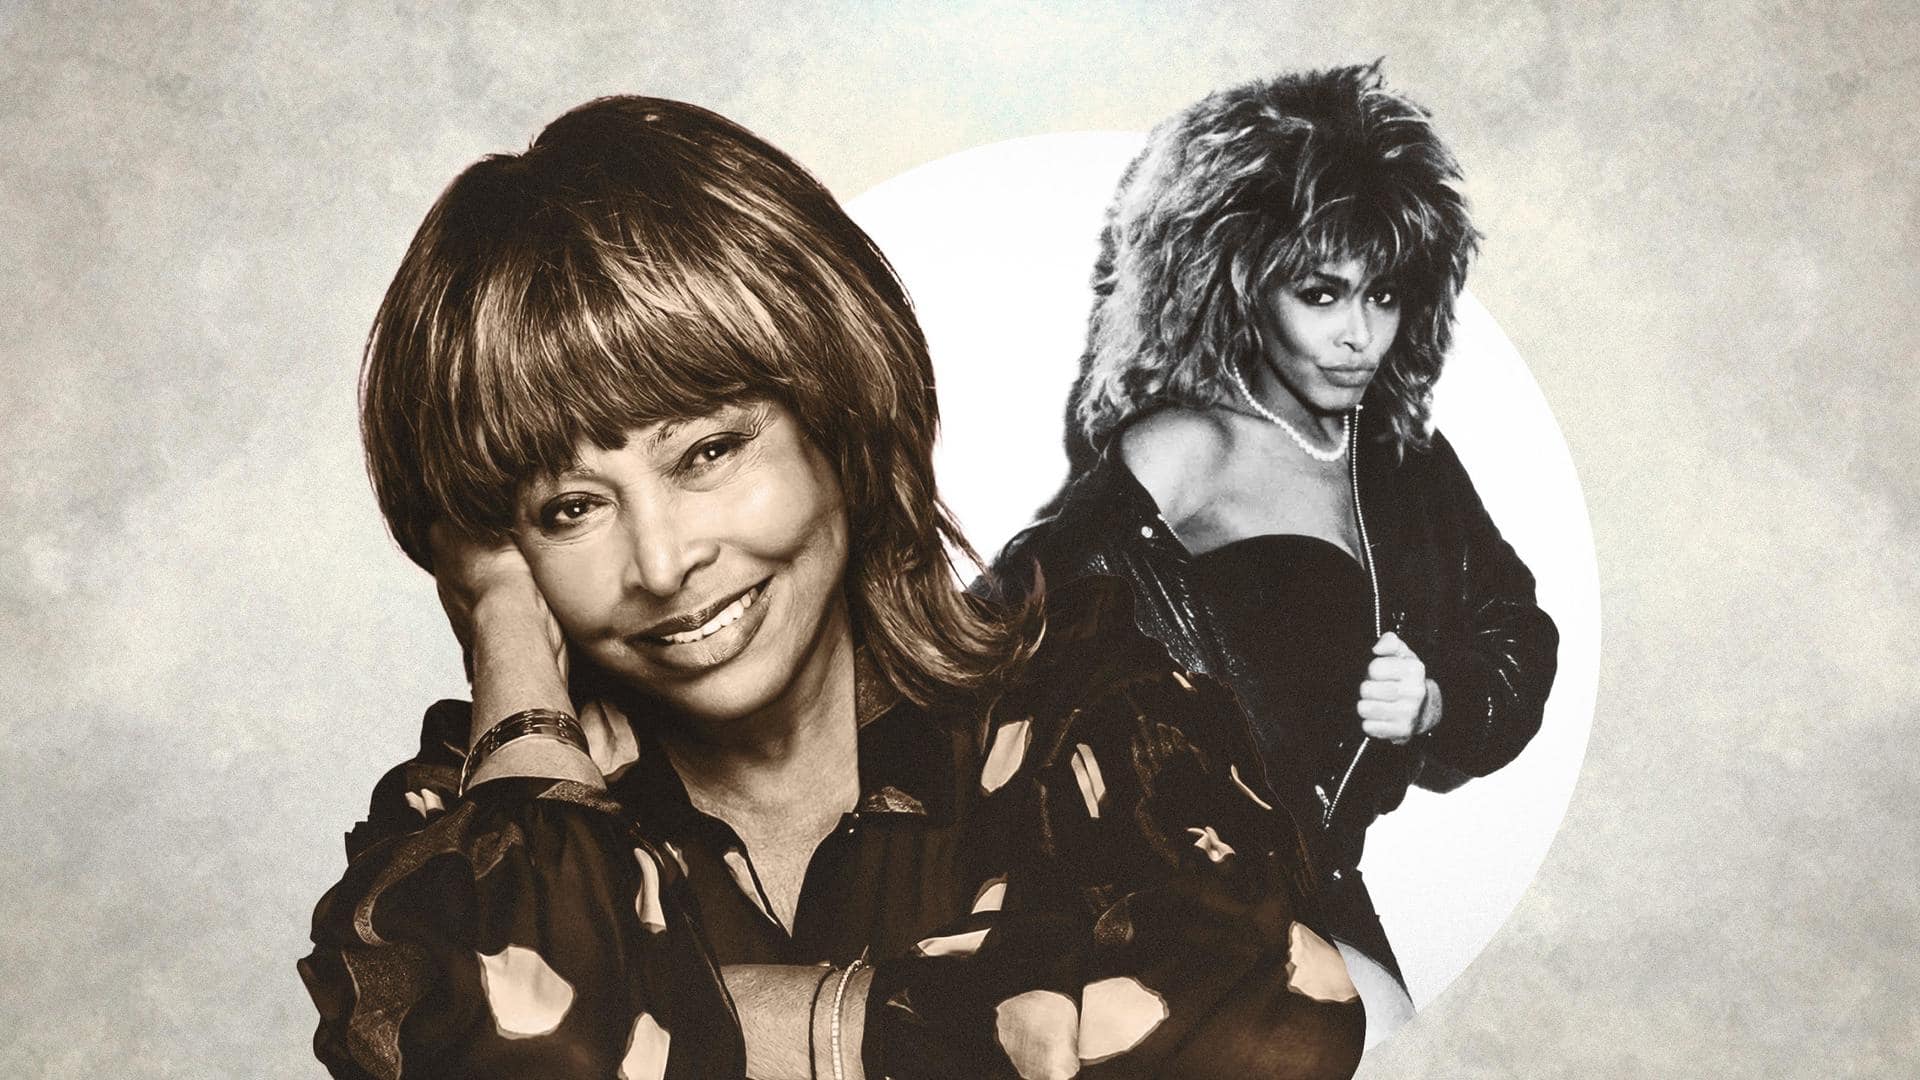 Looking back at the legacy of Swiss singer Tina Turner